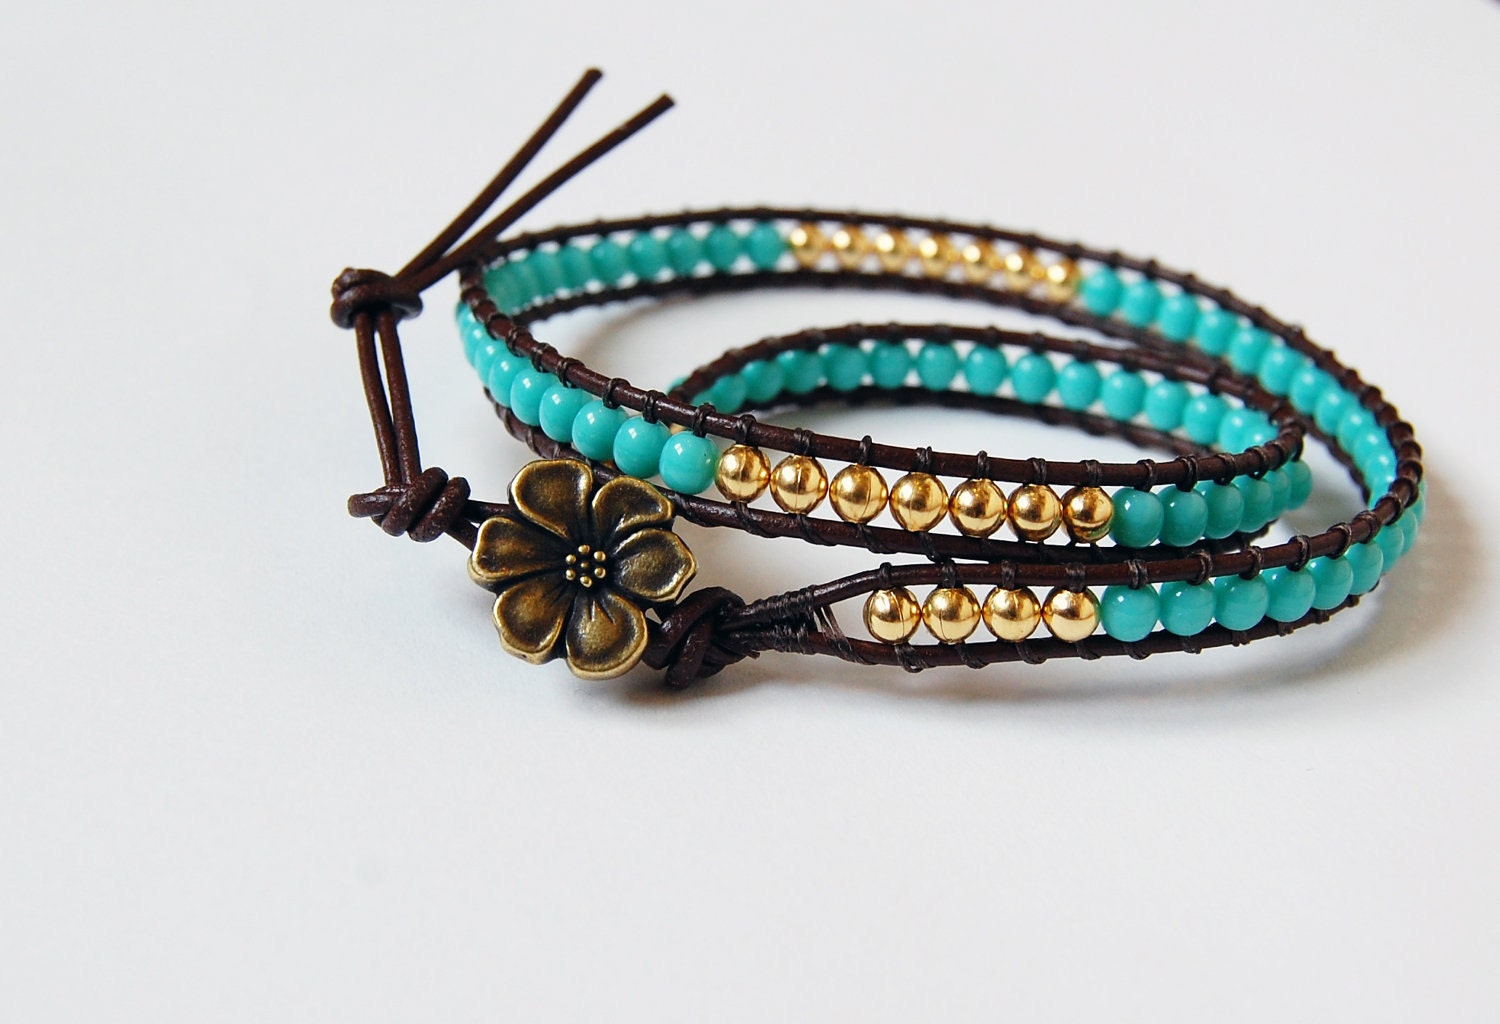 Beaded Leather Bracelet - Vivid Blue and Brass Beads on Brown Leather - beadsandbrass